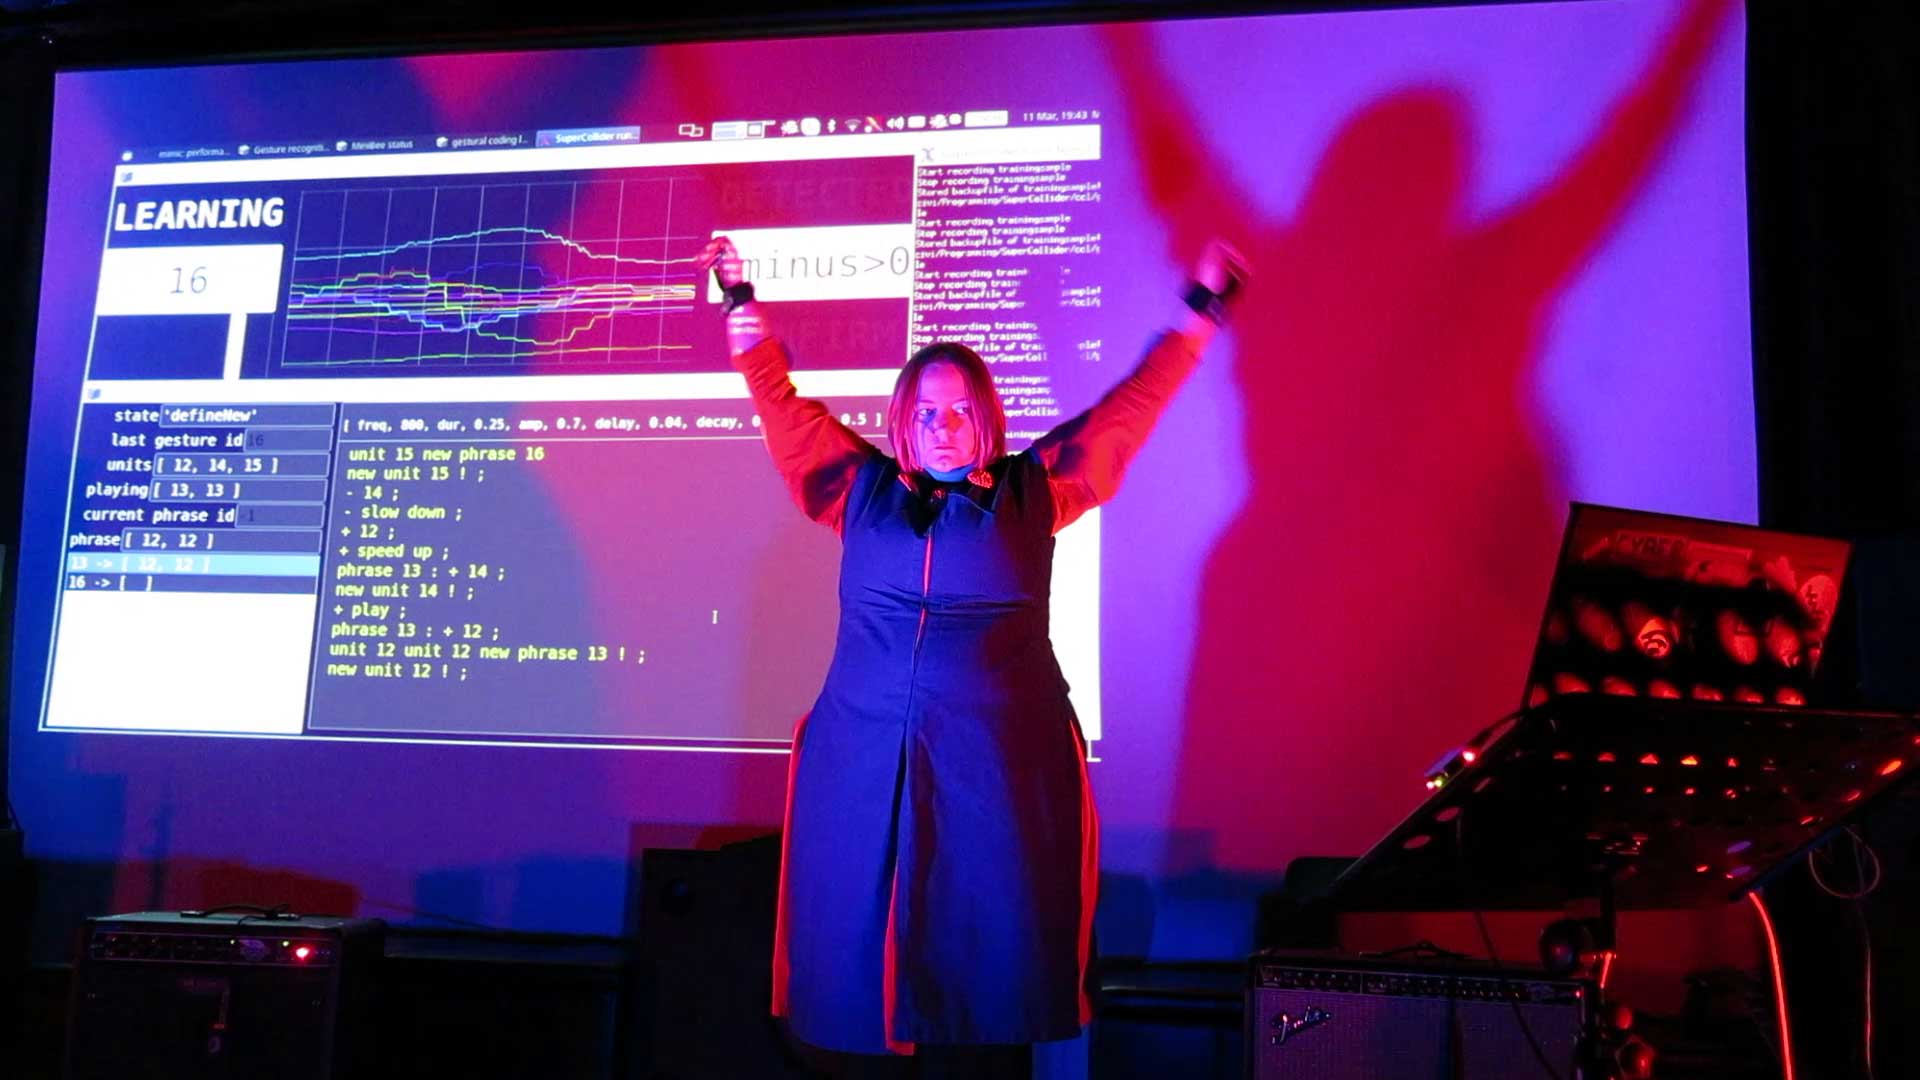  Snapshot from Marije Baalman during her performance 'The Machine is Learning' at the International Conference on Live Interfaces (ICLI) in Trondheim, March 11 2020 - a theatrical performance highlighting the process of training a machine with realtime gestures.